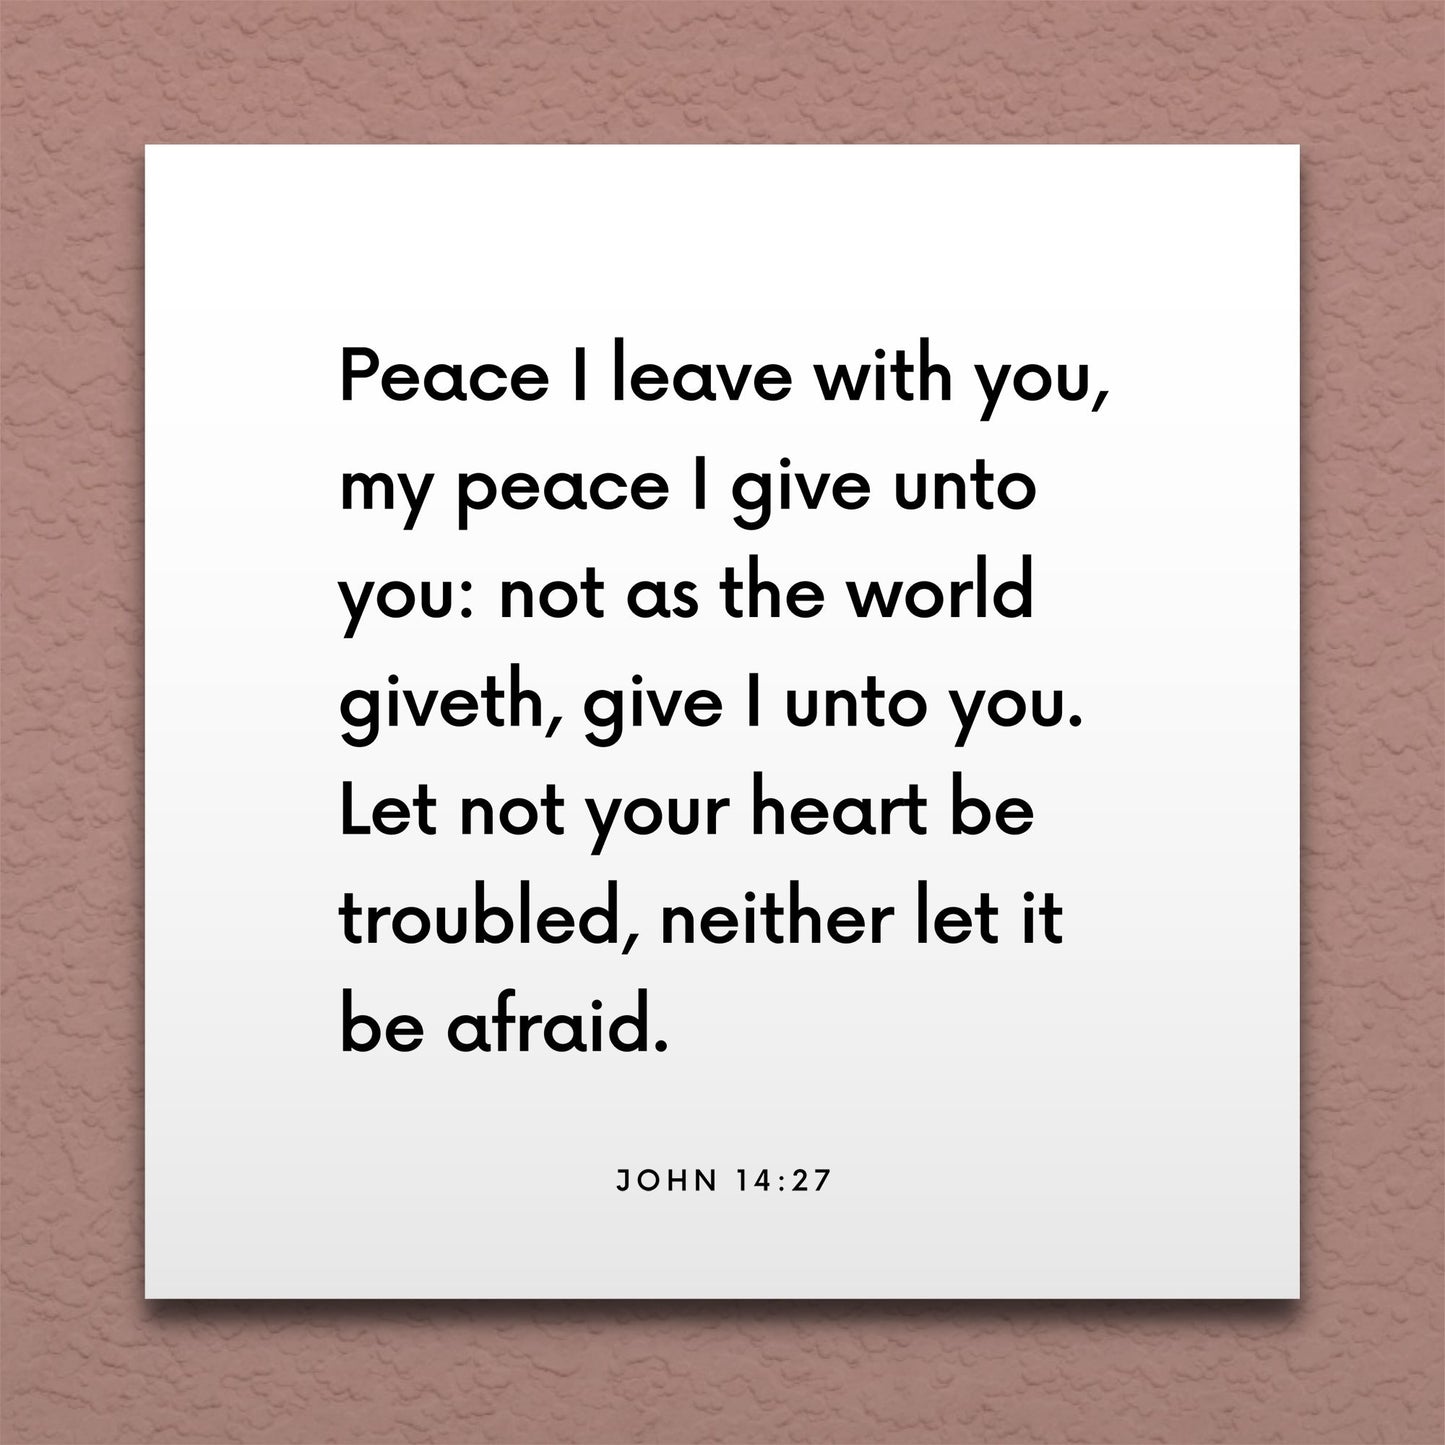 Wall-mounted scripture tile for John 14:27 - "Peace I leave with you, my peace I give unto you"